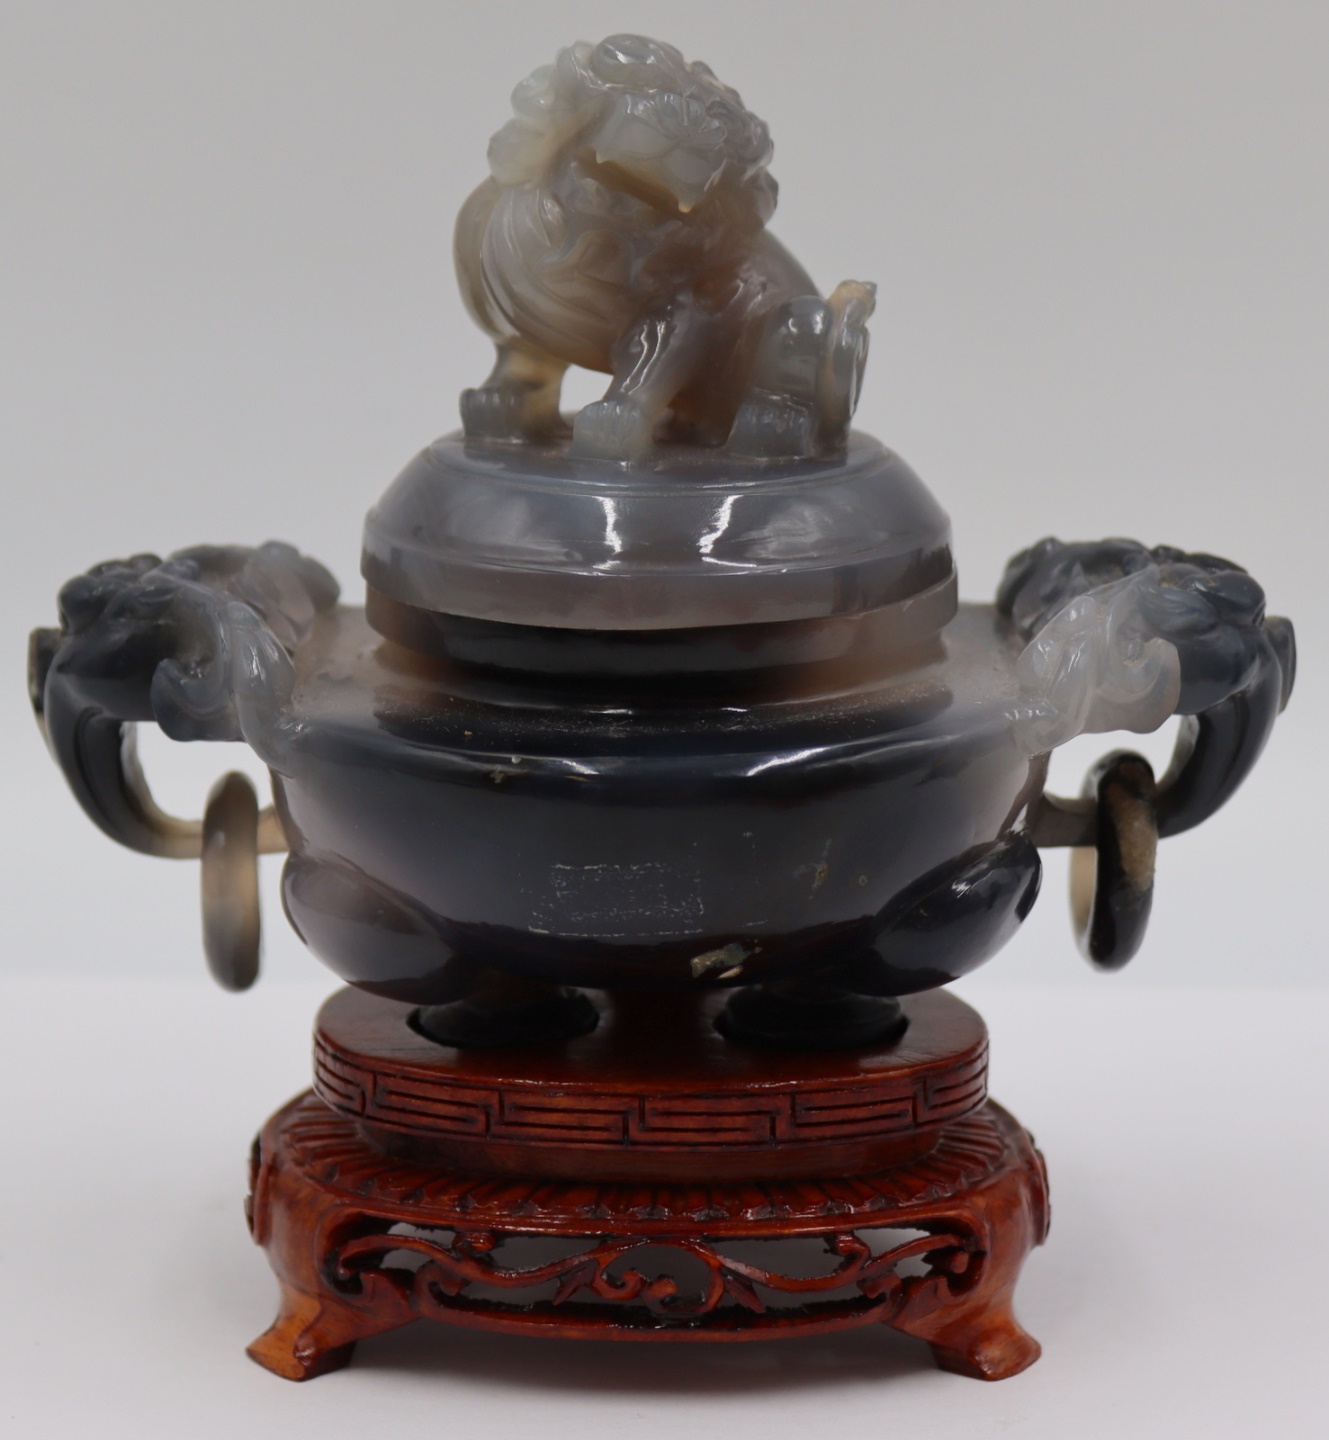 POLISHED STONE CARVING OF A LIDDED 3bd2ab